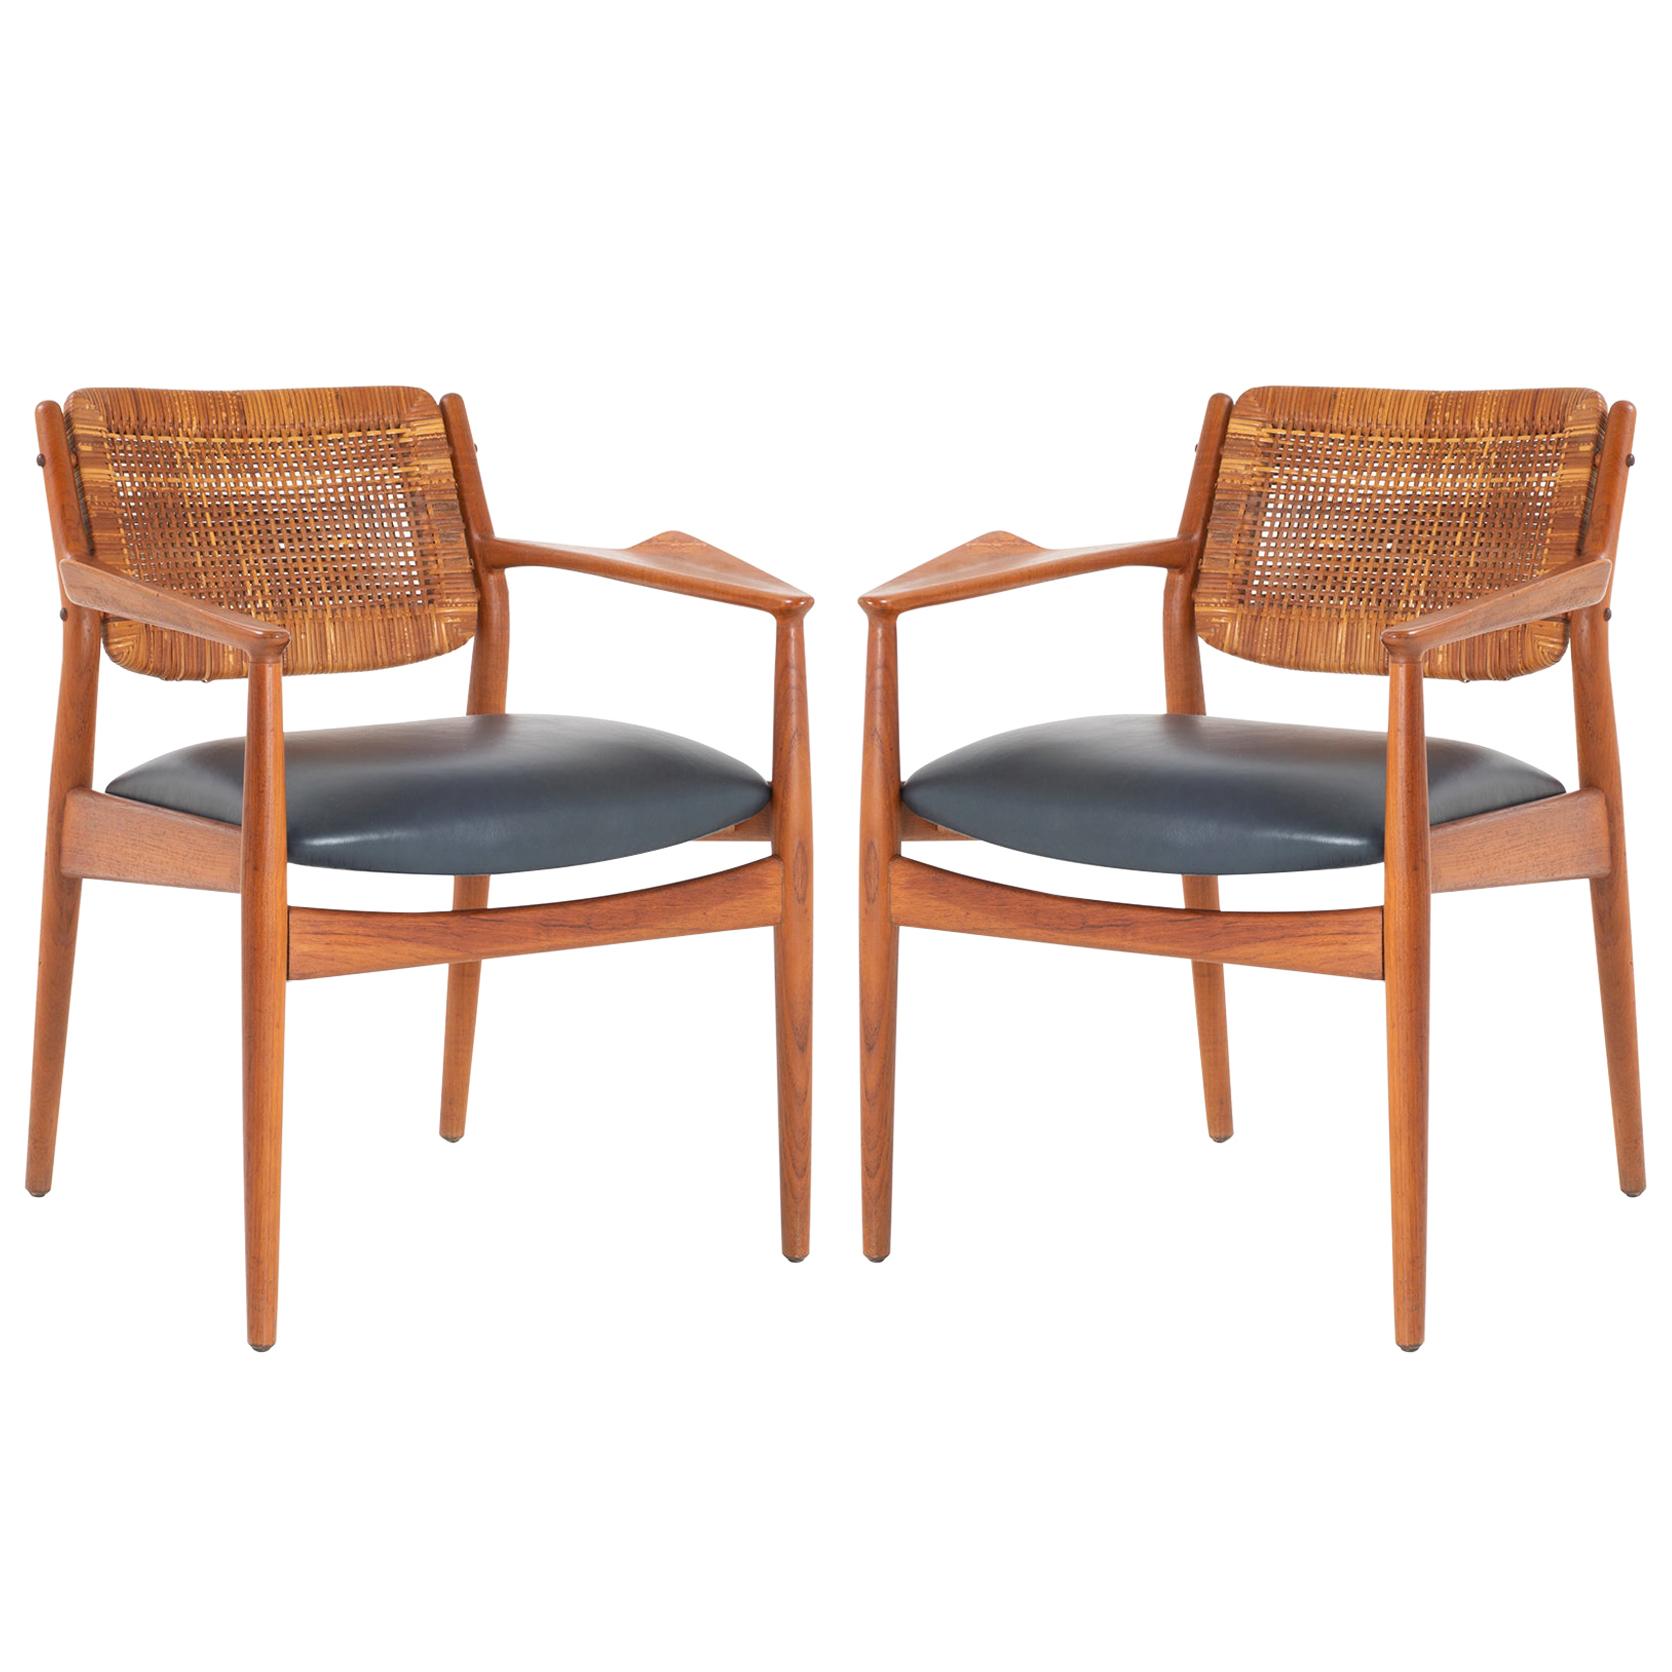 Arne Vodder "Model 51A" Armchairs in Beech and Leather for Sibast, Pair